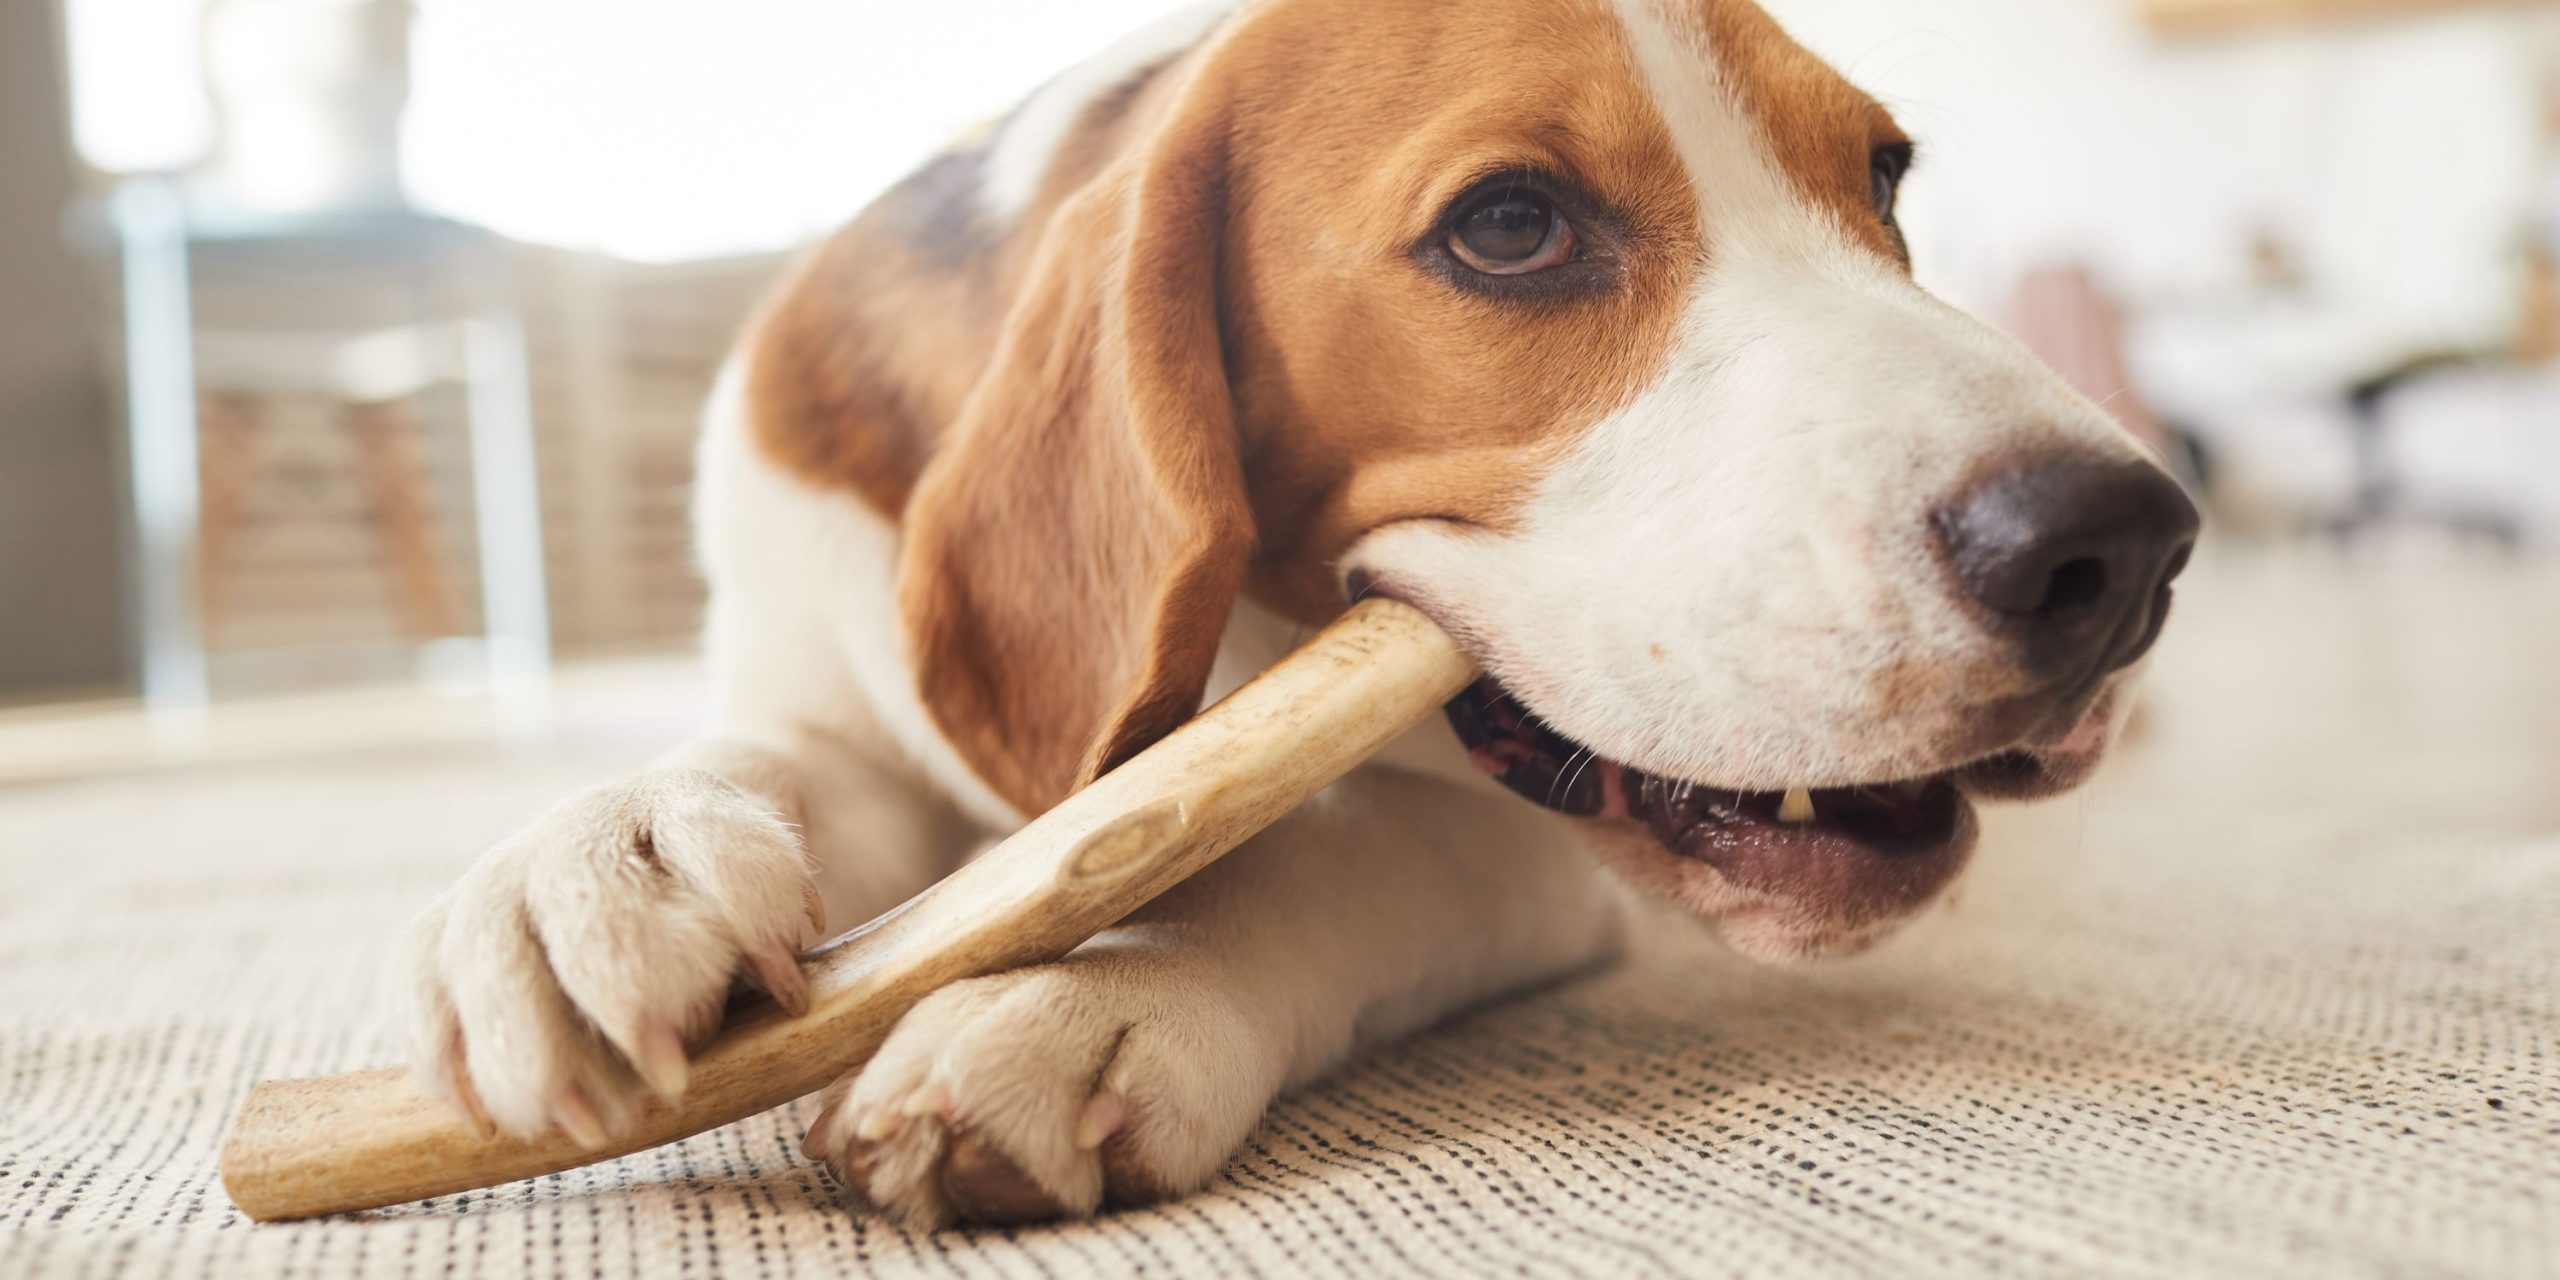 What’s Good For A Dog To Chew On – Top 19 Great Chews for Dogs